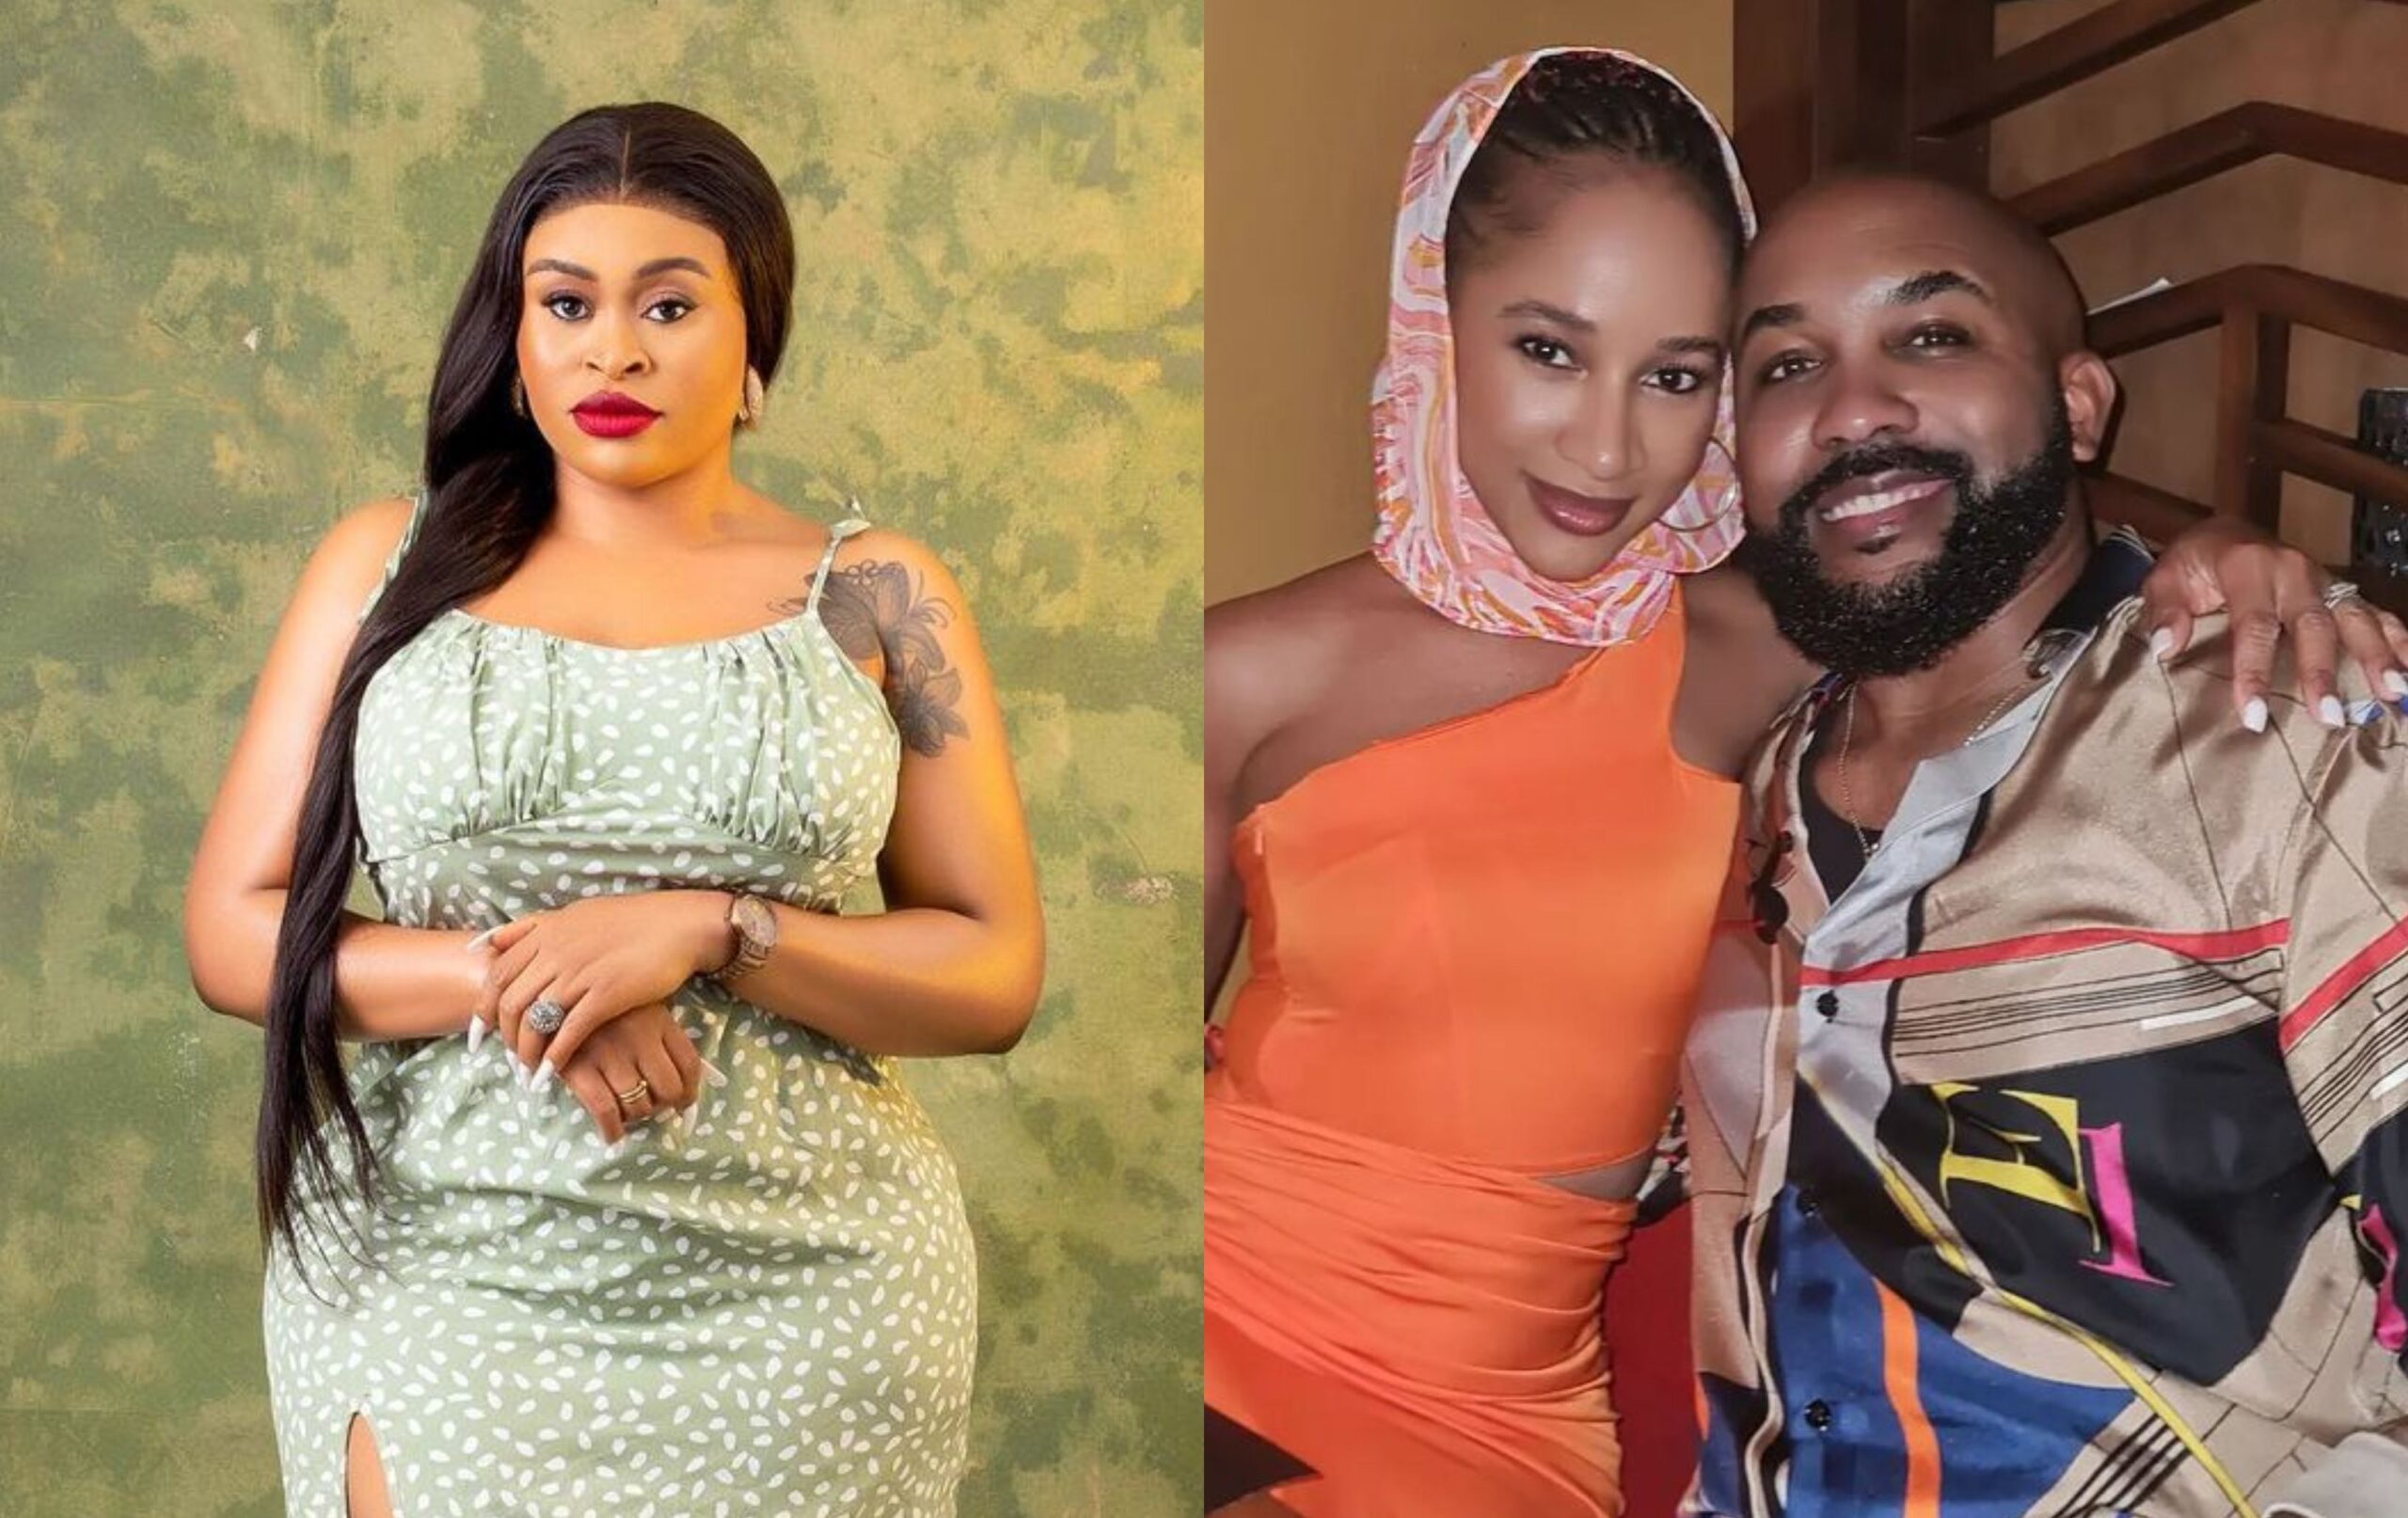 Go back to your husband - Nigerians slams Sarah Martins over her comment on Adesua and Banky W cheating scandal